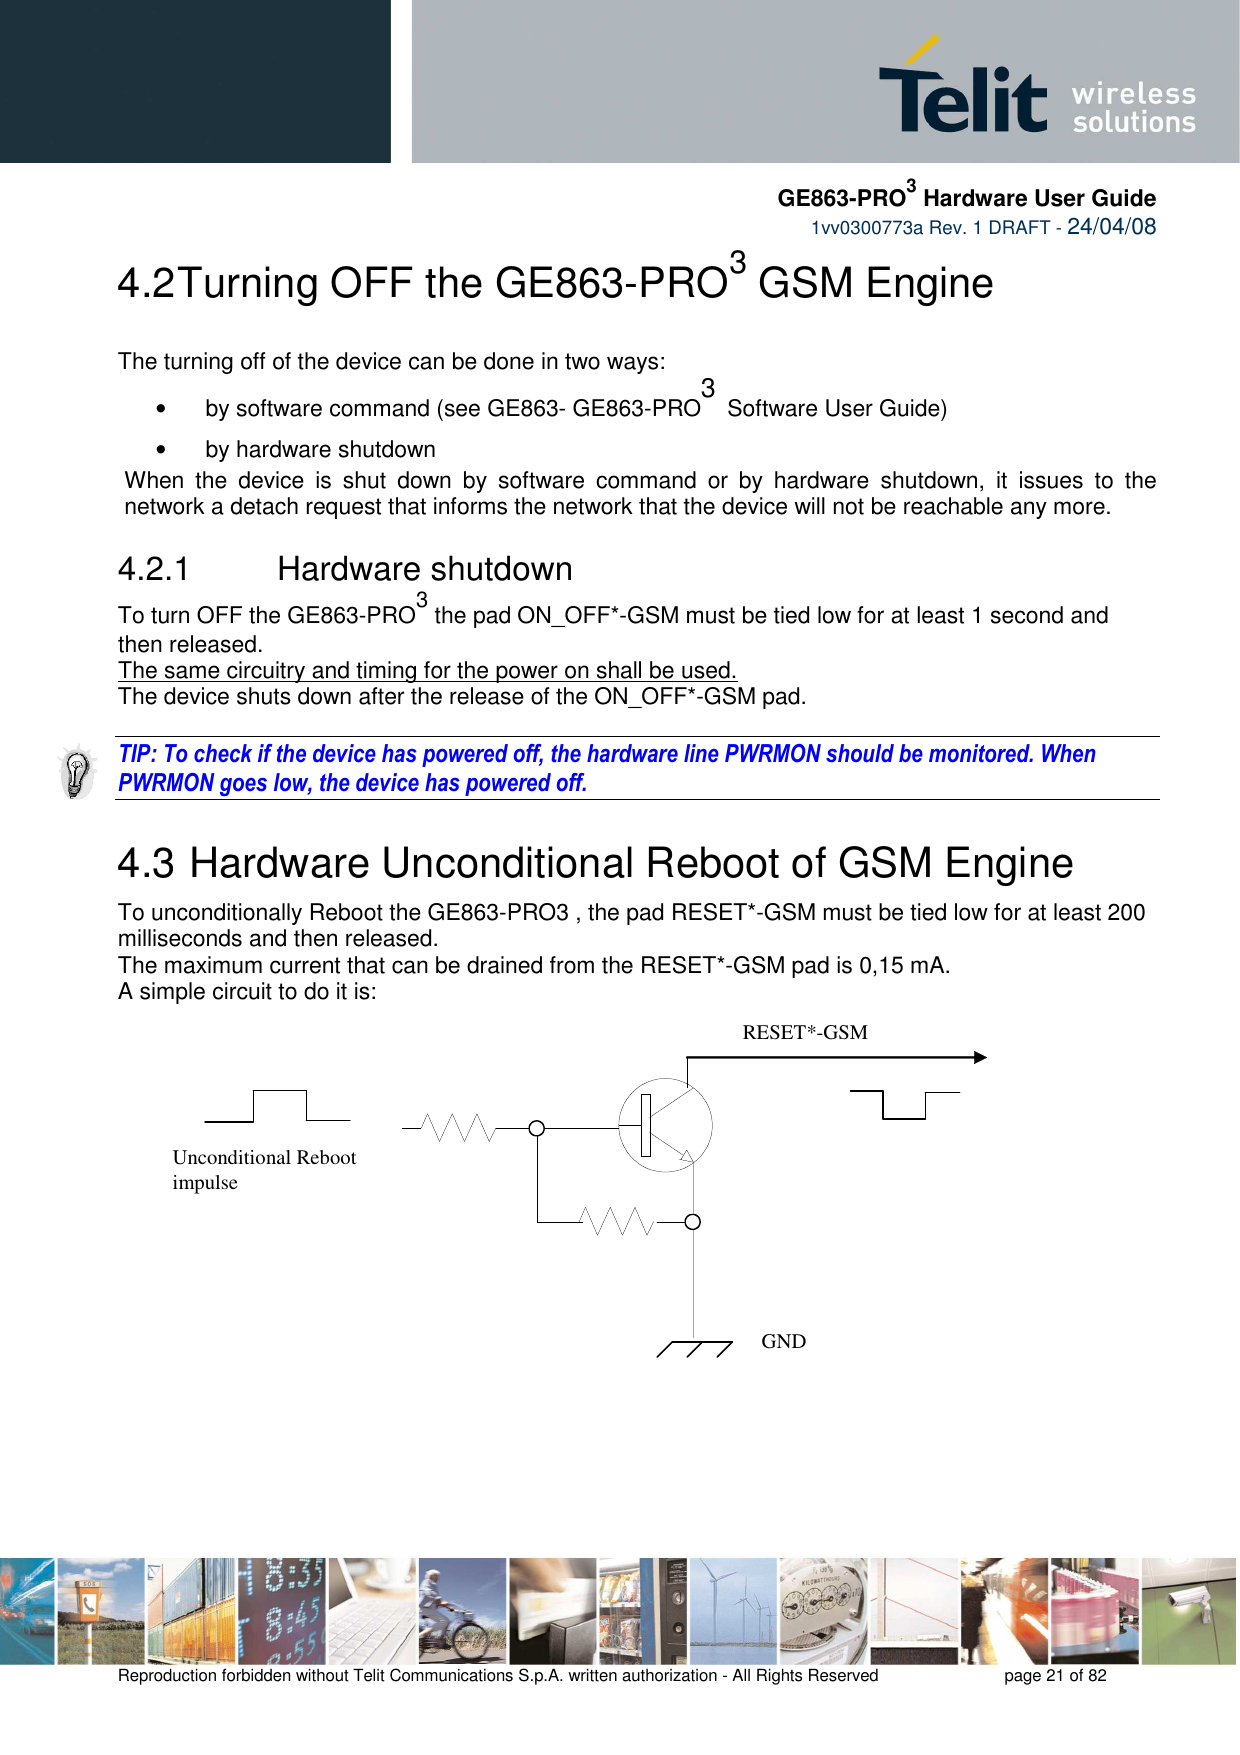     GE863-PRO3 Hardware User Guide  1vv0300773a Rev. 1 DRAFT - 24/04/08    Reproduction forbidden without Telit Communications S.p.A. written authorization - All Rights Reserved    page 21 of 82  4.2 Turning OFF the GE863-PRO3 GSM Engine  The turning off of the device can be done in two ways: •  by software command (see GE863- GE863-PRO3 Software User Guide) •  by hardware shutdown When  the  device  is  shut  down  by  software  command  or  by  hardware  shutdown,  it  issues  to  the network a detach request that informs the network that the device will not be reachable any more.   4.2.1   Hardware shutdown To turn OFF the GE863-PRO3 the pad ON_OFF*-GSM must be tied low for at least 1 second and then released. The same circuitry and timing for the power on shall be used. The device shuts down after the release of the ON_OFF*-GSM pad.  TIP: To check if the device has powered off, the hardware line PWRMON should be monitored. When PWRMON goes low, the device has powered off.  4.3  Hardware Unconditional Reboot of GSM Engine To unconditionally Reboot the GE863-PRO3 , the pad RESET*-GSM must be tied low for at least 200 milliseconds and then released. The maximum current that can be drained from the RESET*-GSM pad is 0,15 mA. A simple circuit to do it is:                   RESET*-GSM Unconditional Reboot impulse   GND 